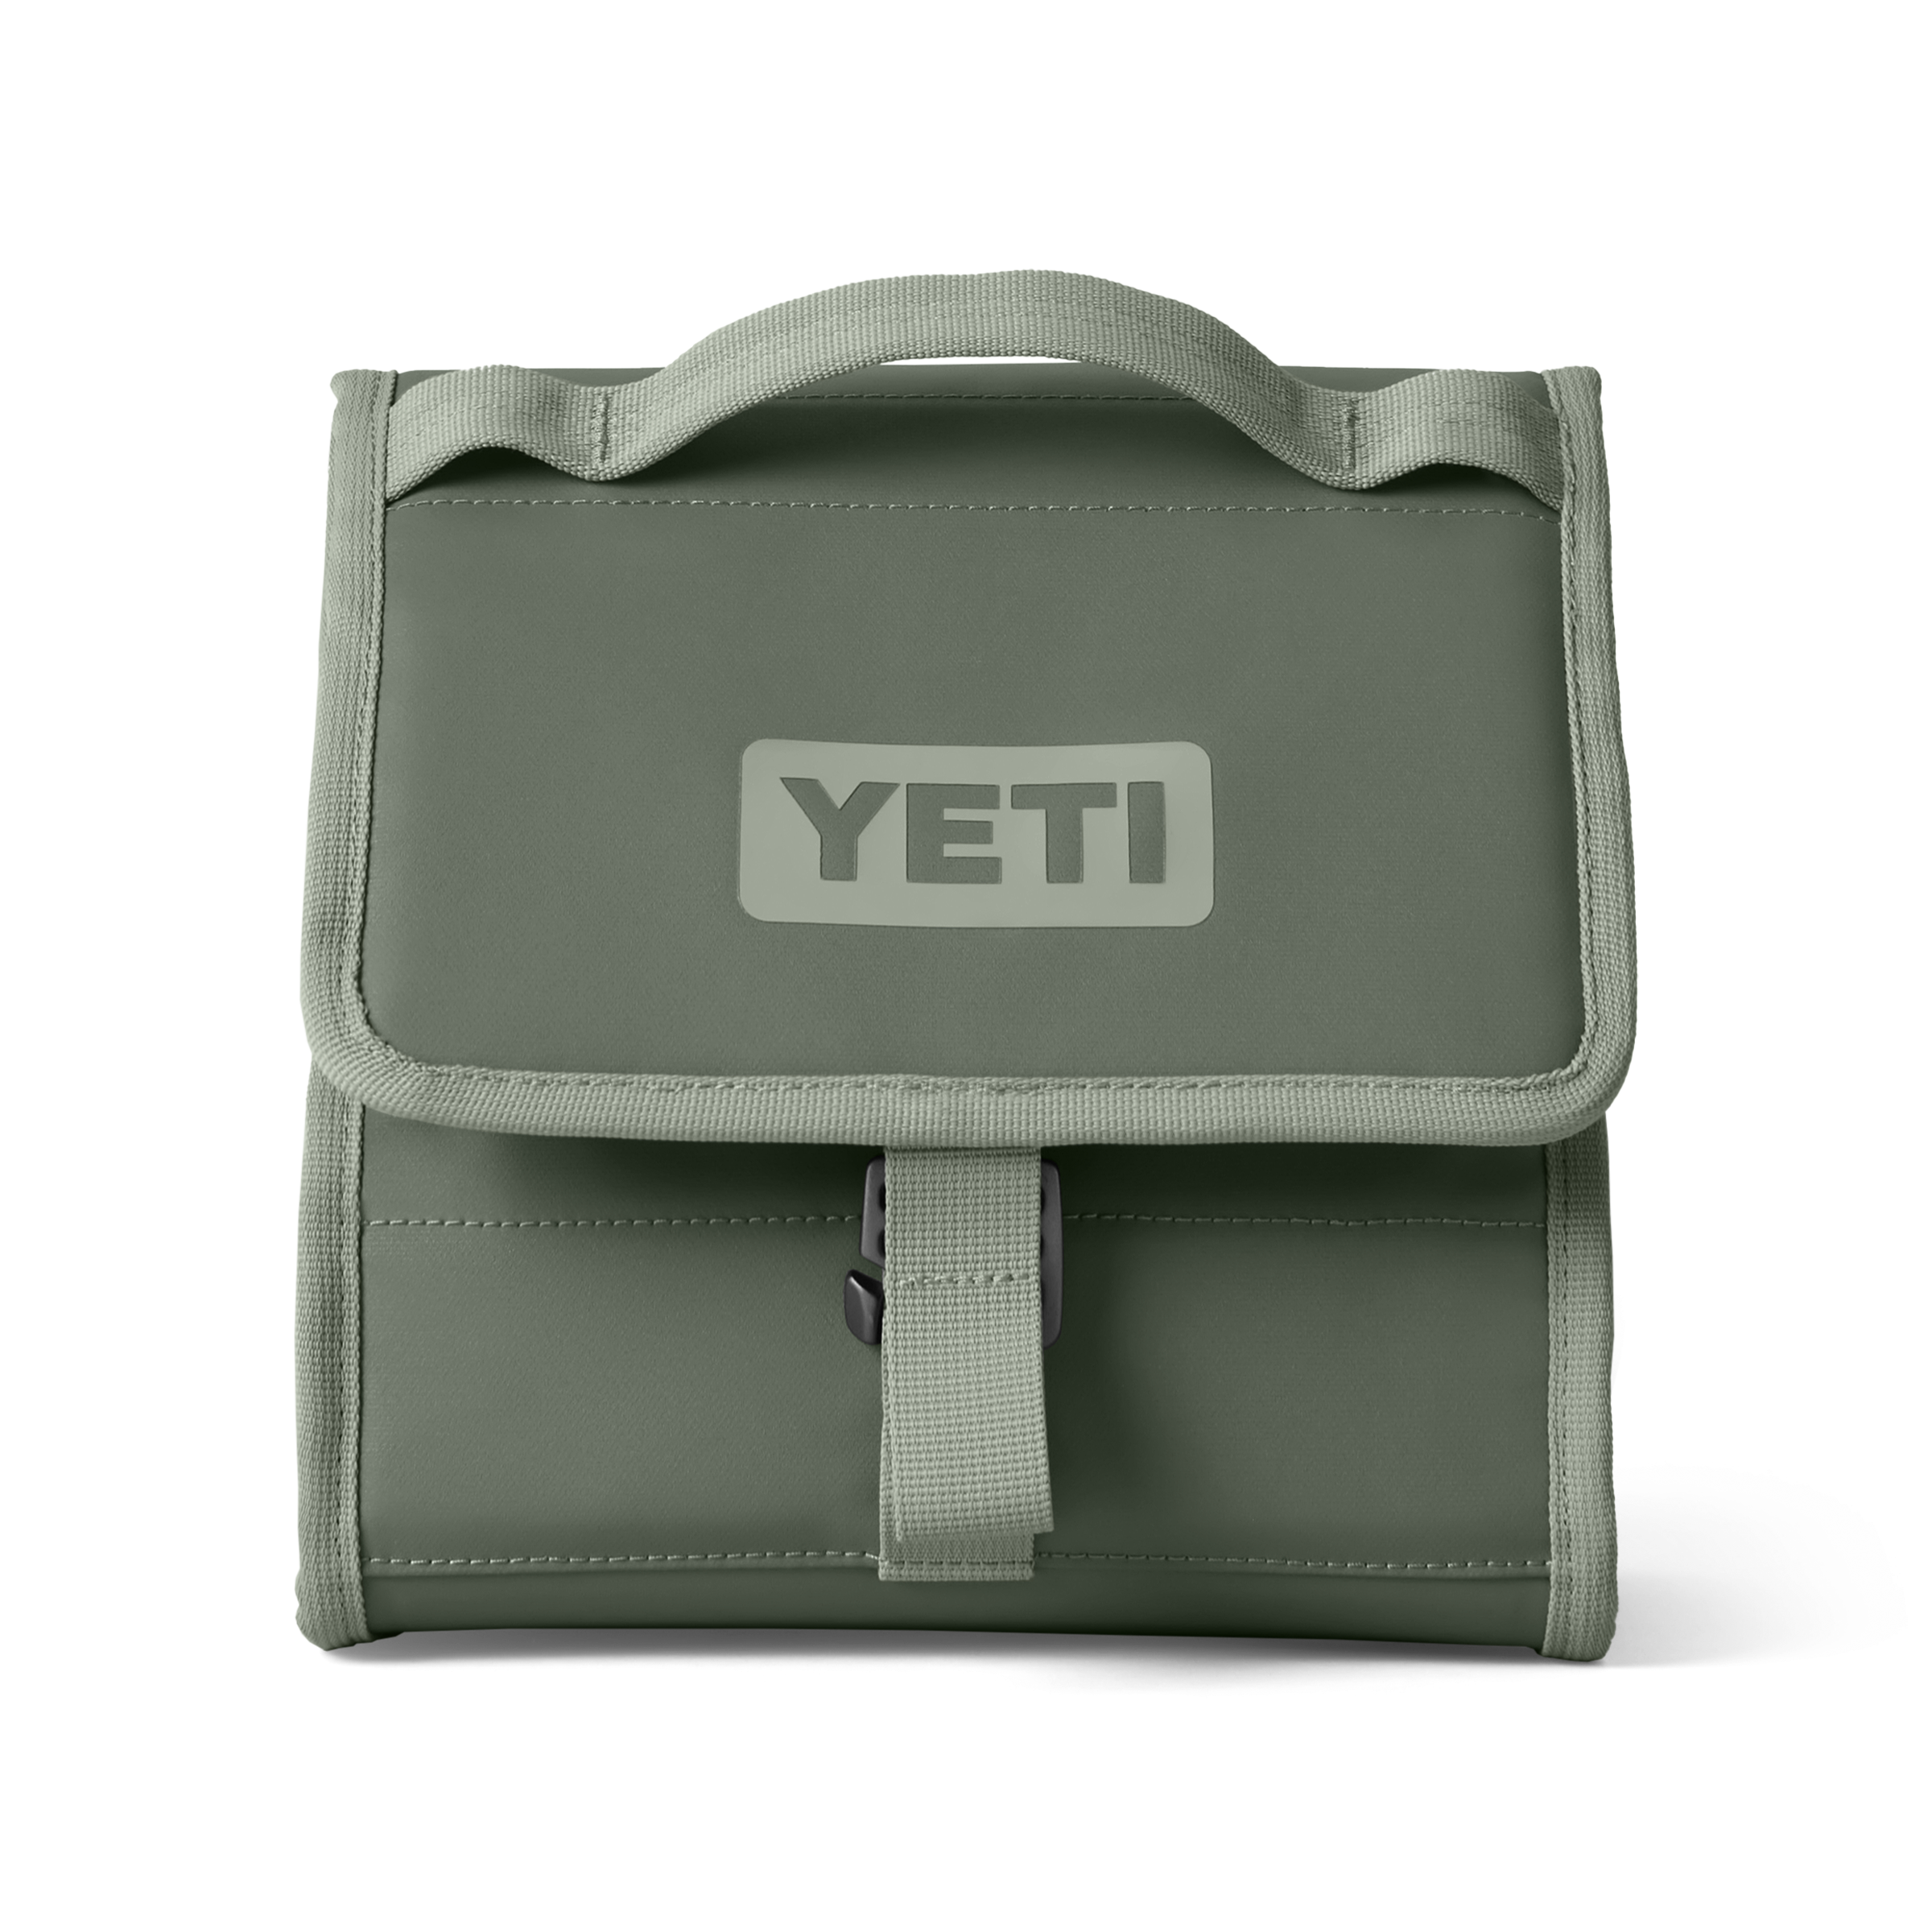 YETI Everyday Bags, Free UK Delivery